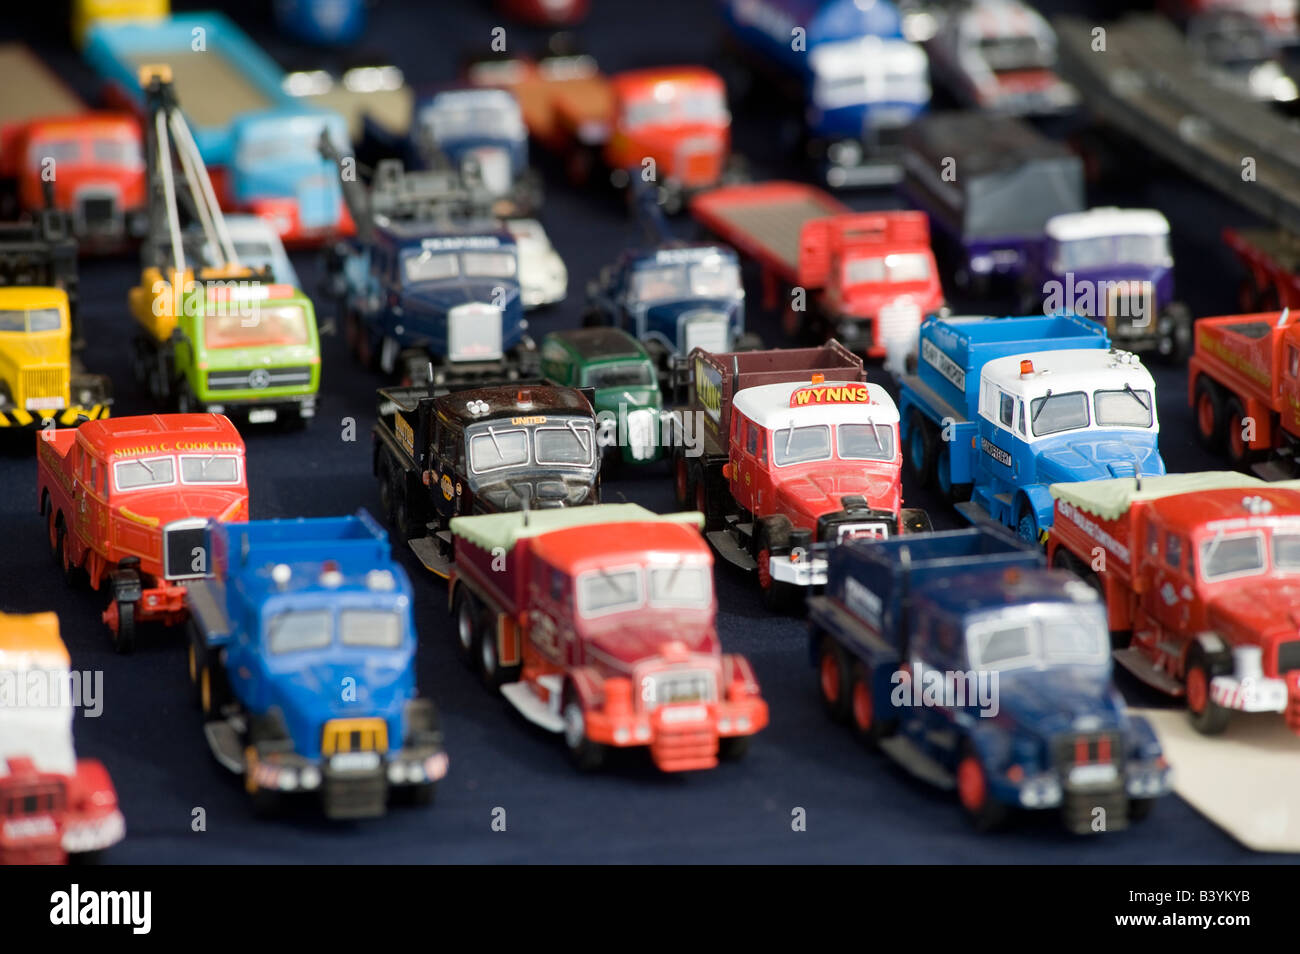 Display of small toy lorries at a collectors enthusiasts fair in the uk Stock Photo